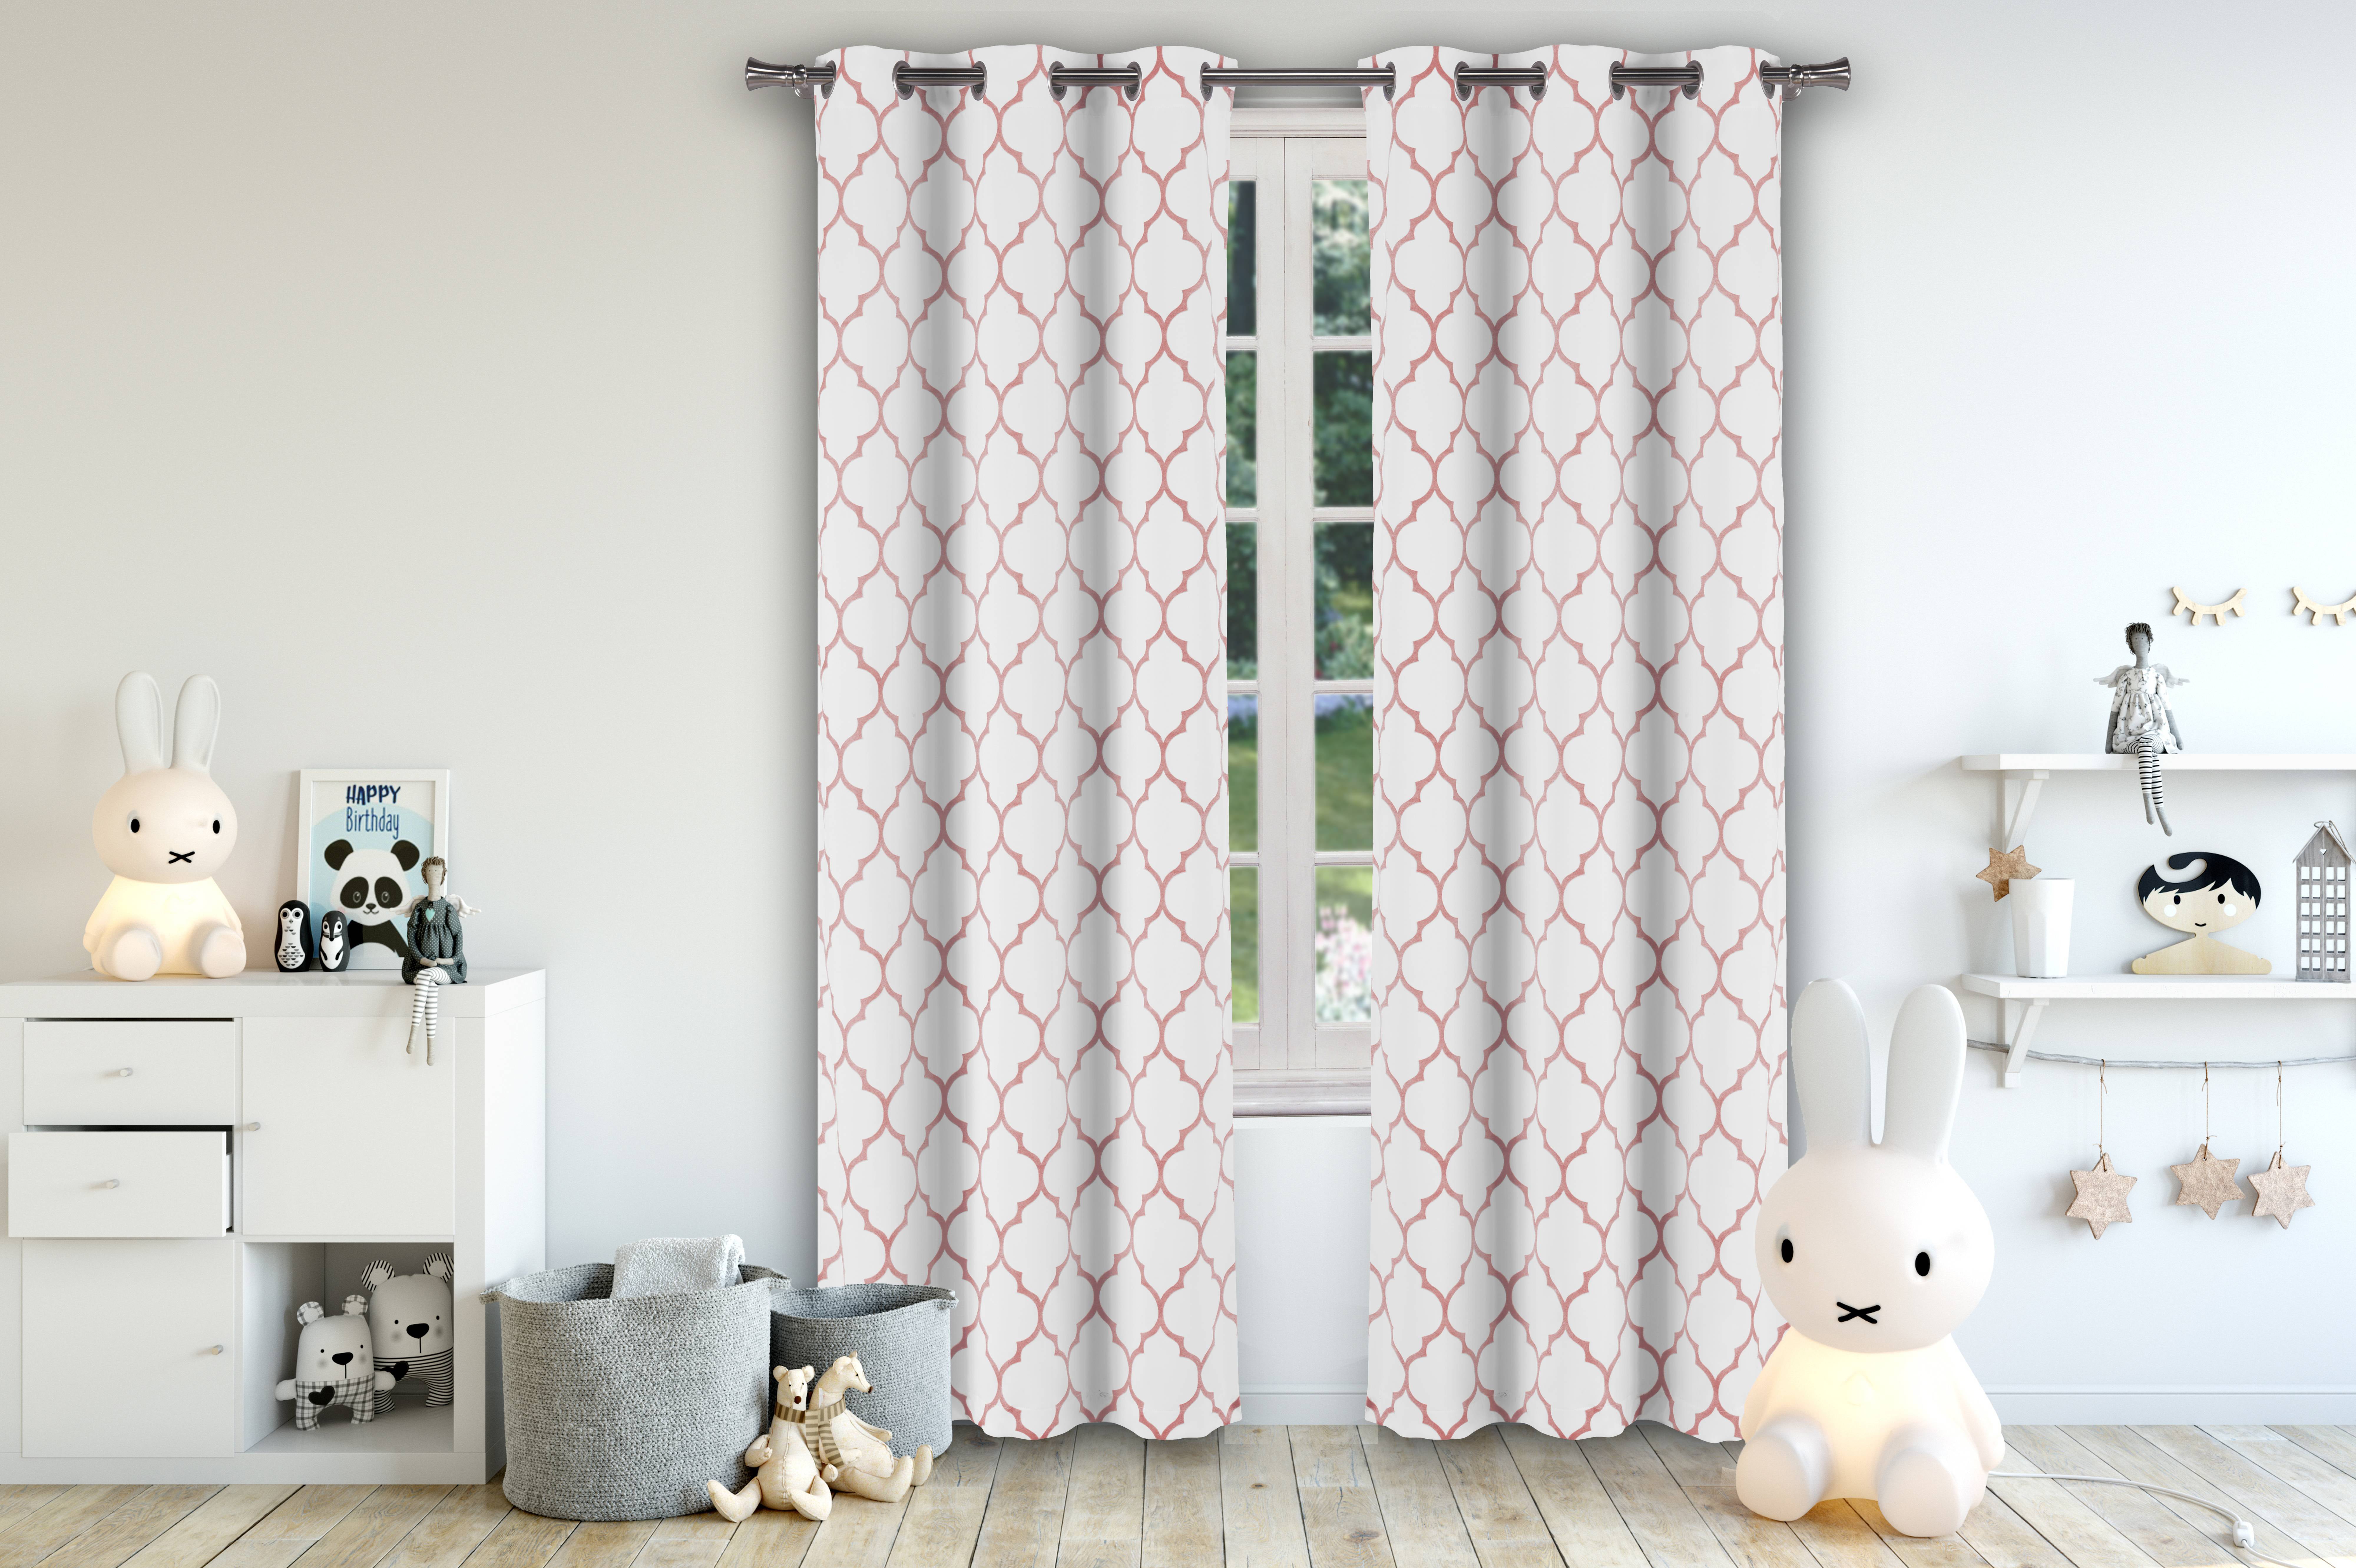 Mattyson Geometric Kids' Blackout Curtains, 84-inches in L, Set of 2